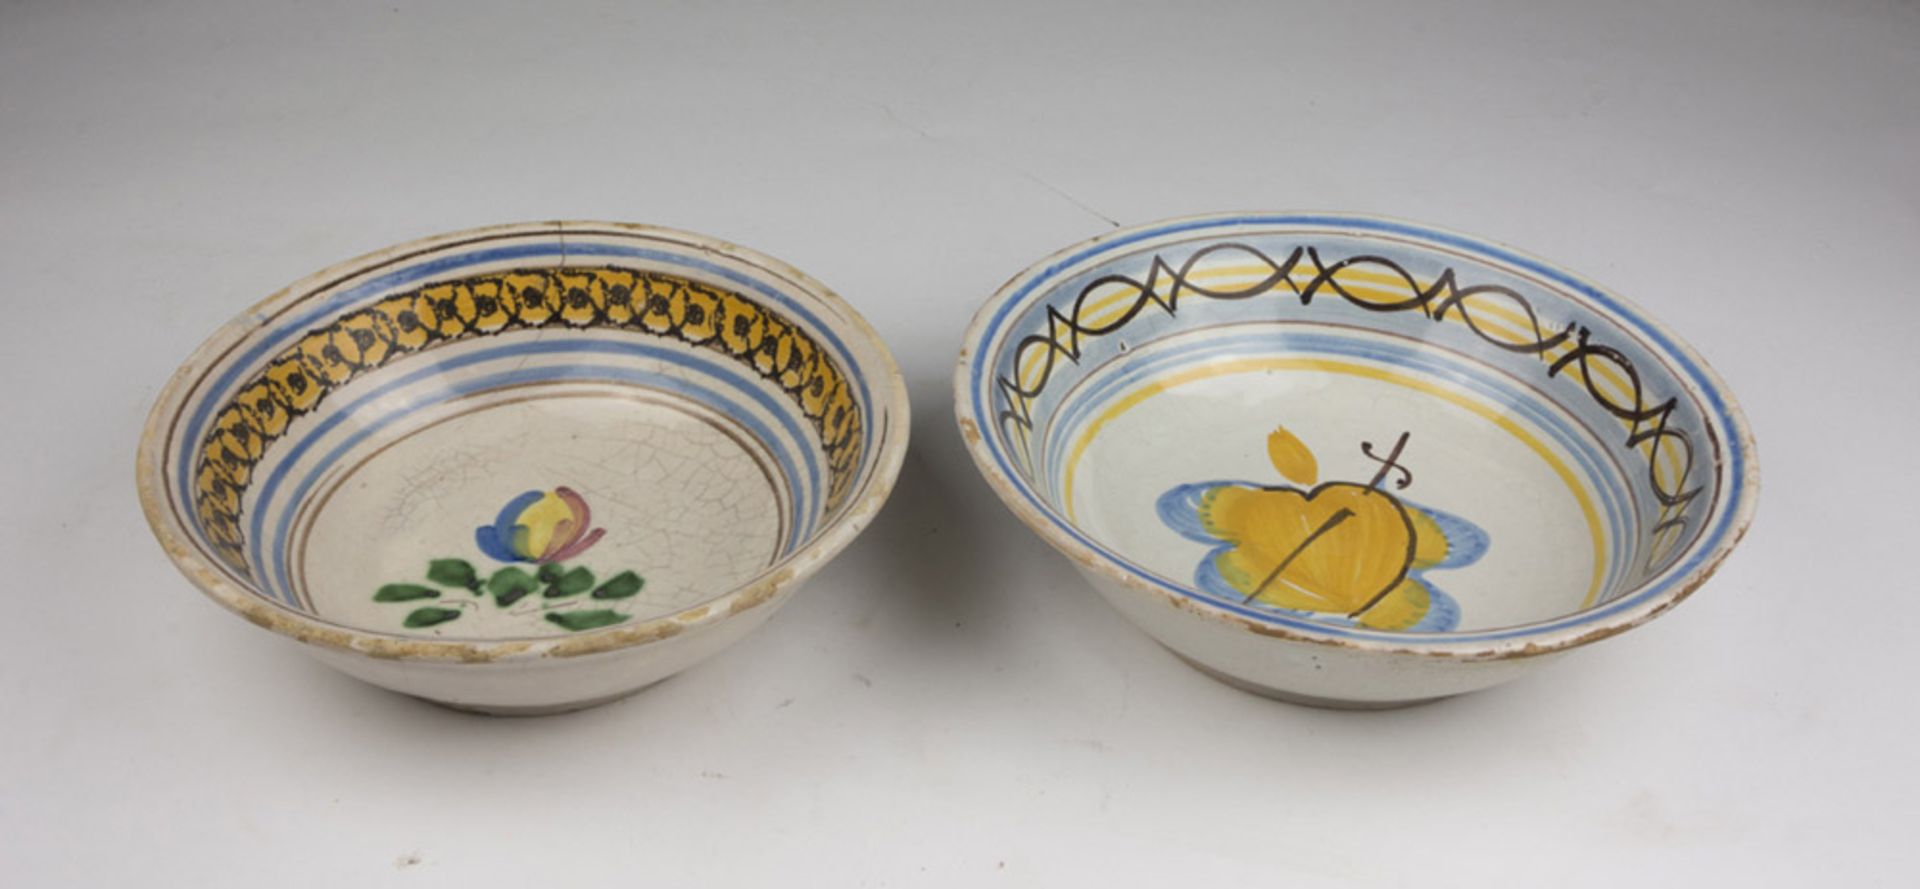 TWO CERAMIC SALAD BOWLS, CAMPANIAN WORKSHOP LATE 19TH CENTURY